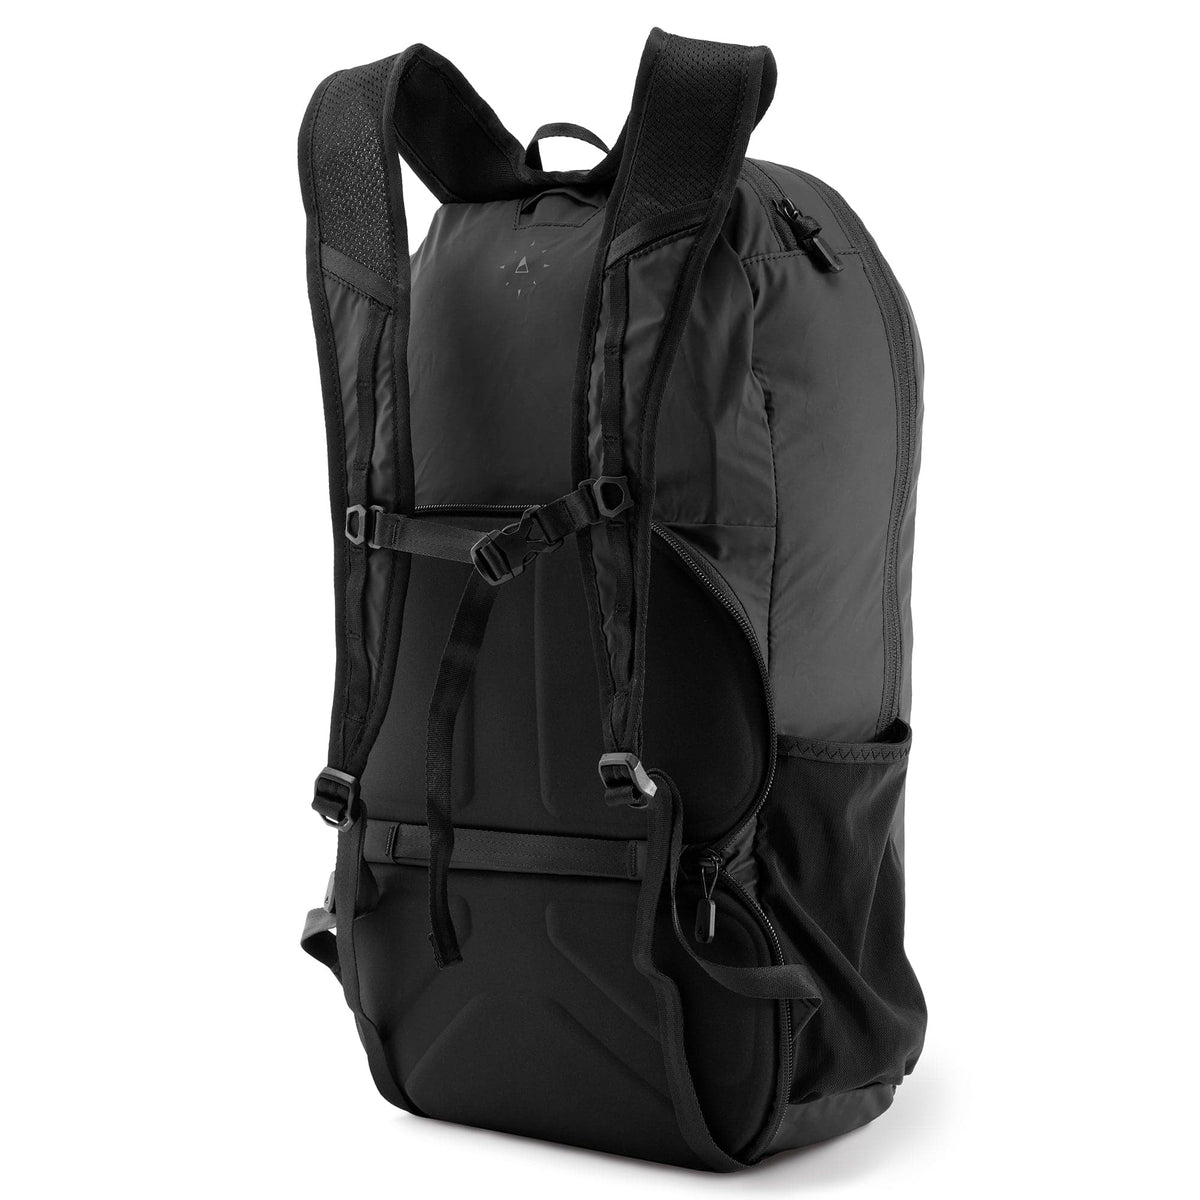 Nomatic Navigator Collapsible Backpack